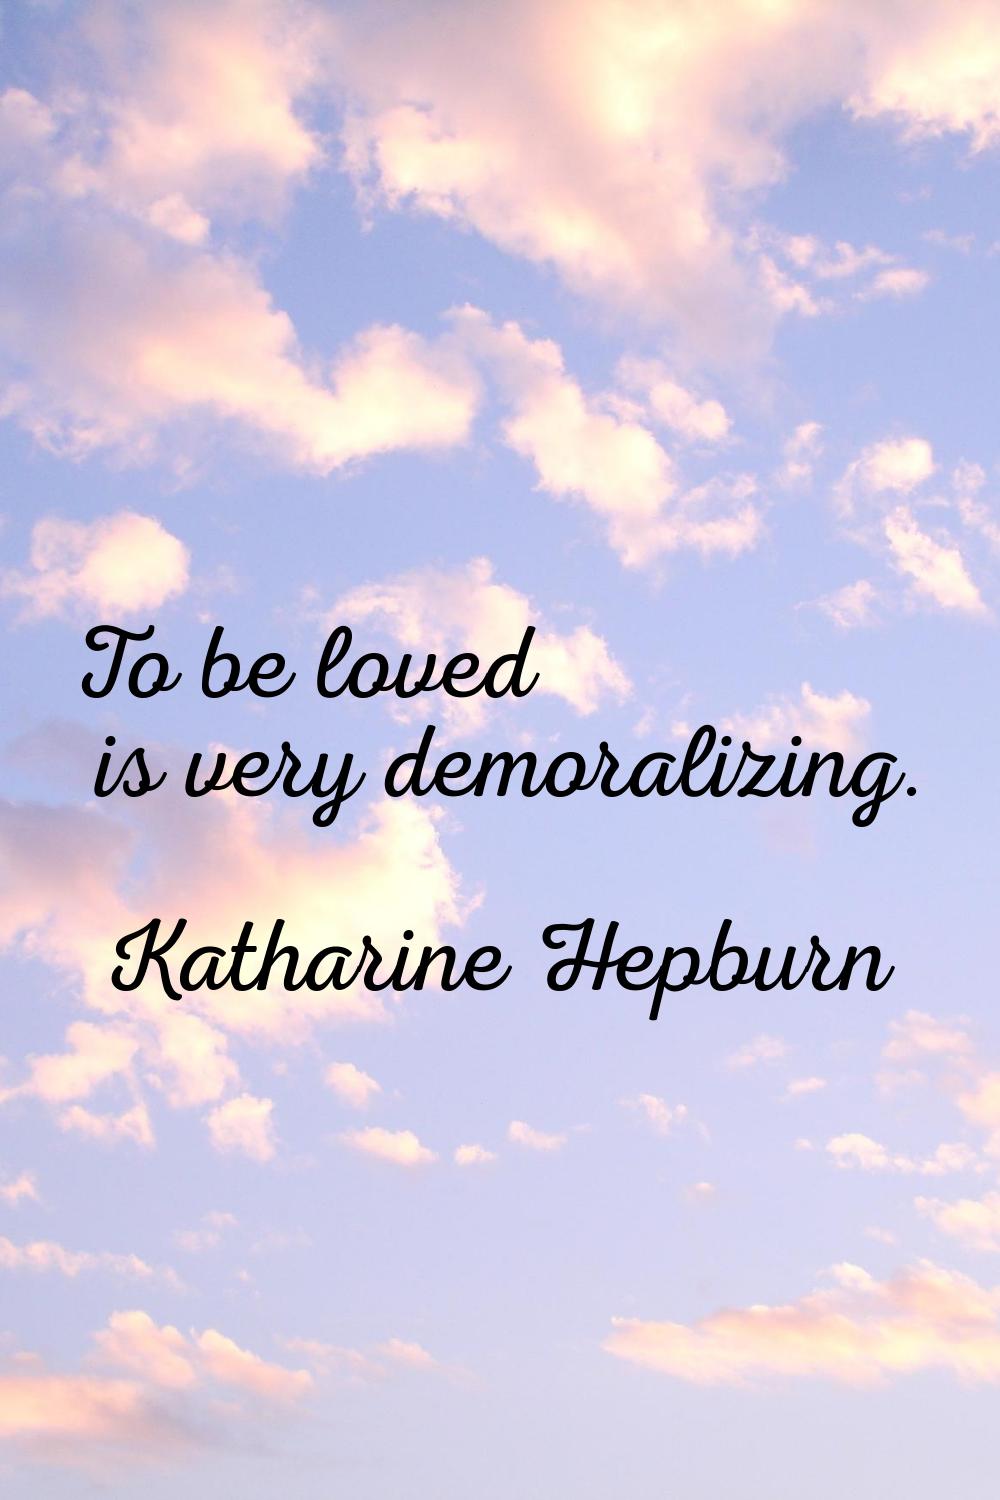 To be loved is very demoralizing.